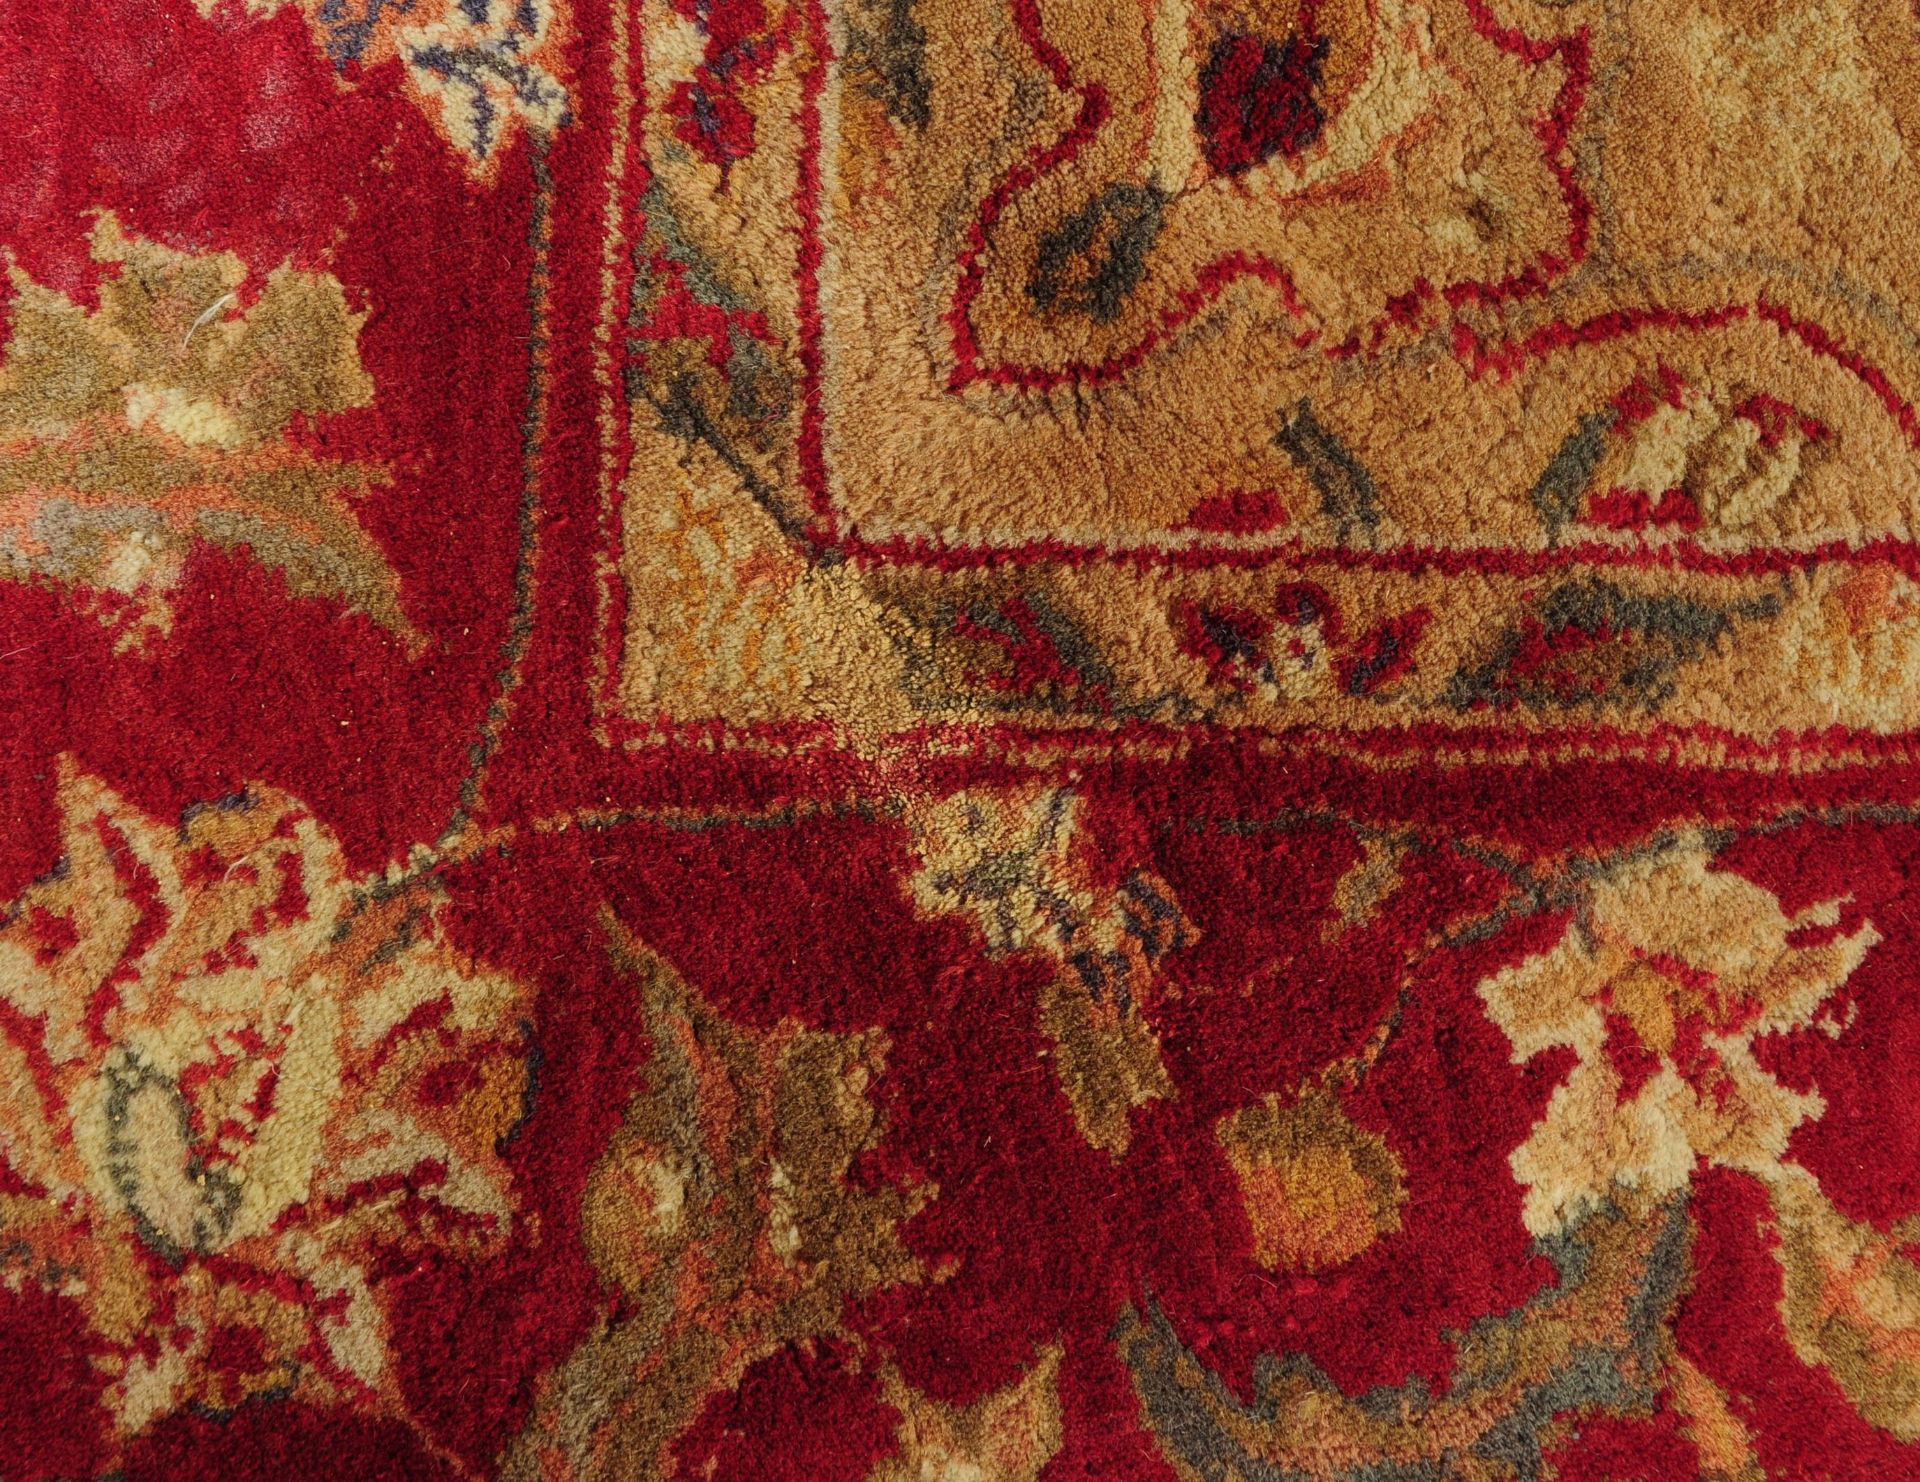 MID TO LATE 20TH CENTURY RECTANGULAR FLORAL RUG CARPET - Image 2 of 4